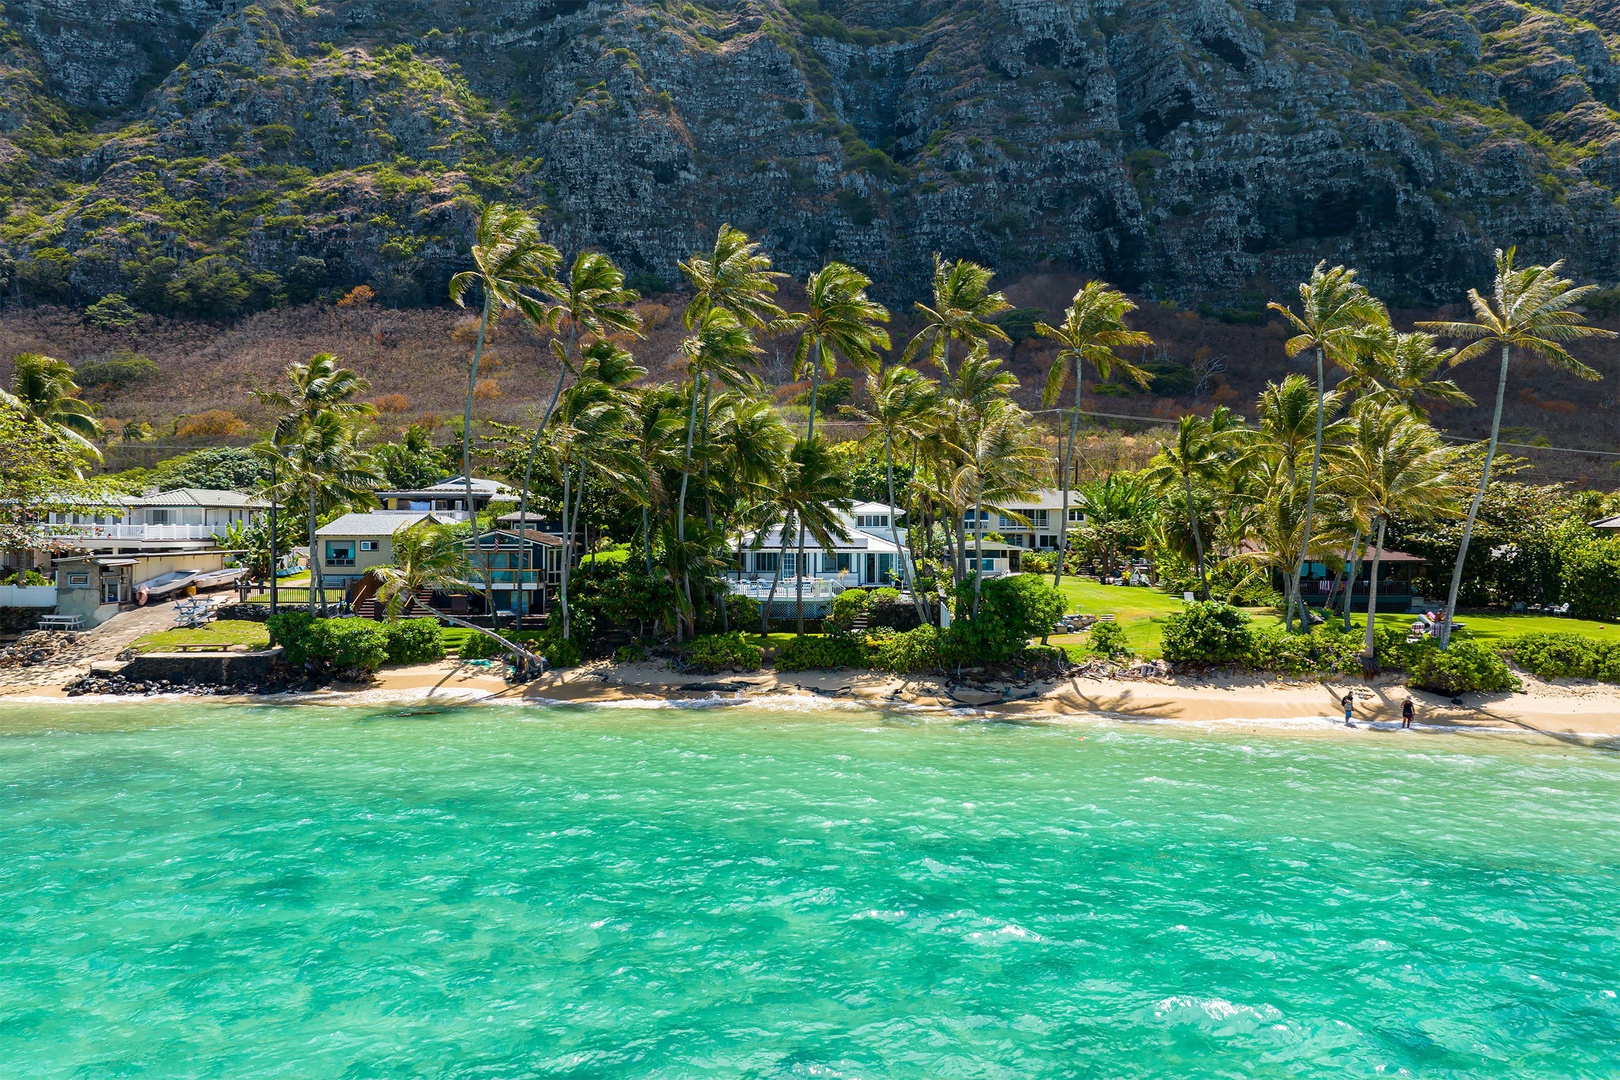 Waimanalo Vacation Rentals, Mana Kai at Waimanalo - Idyllic vacation home nestled in front of Hawaii's turquoise waters, offering a serene escape to paradise.